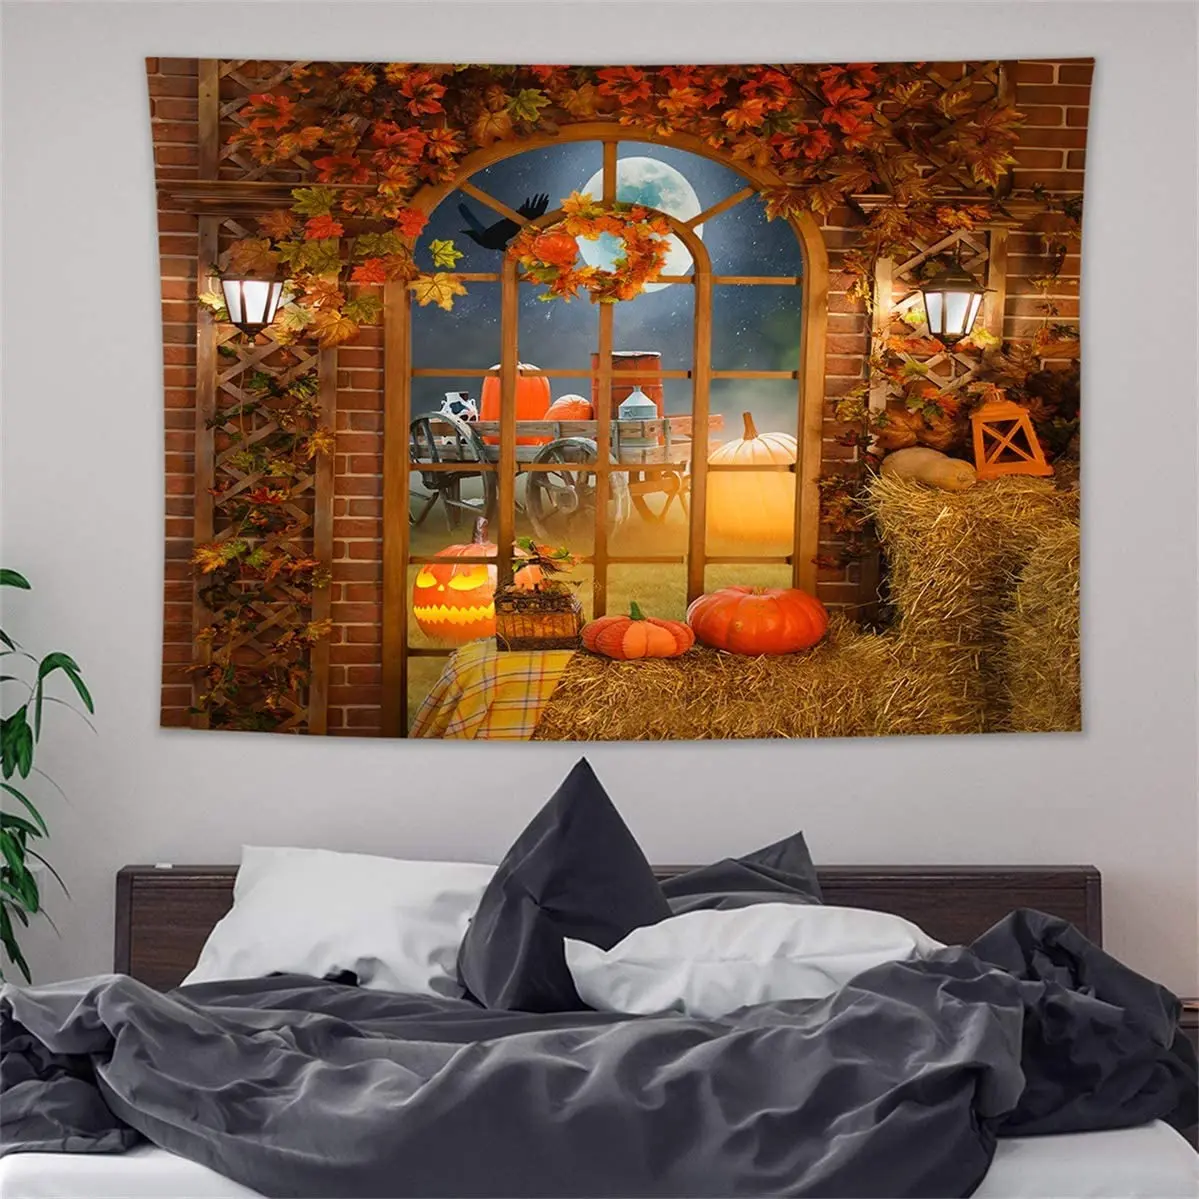 

Thanksgiving Pumpkin Tapestry Wall Hanging Farm Haystack And Orange Maple Leave Halloween Crow Full Moon For Bedroom Living Room